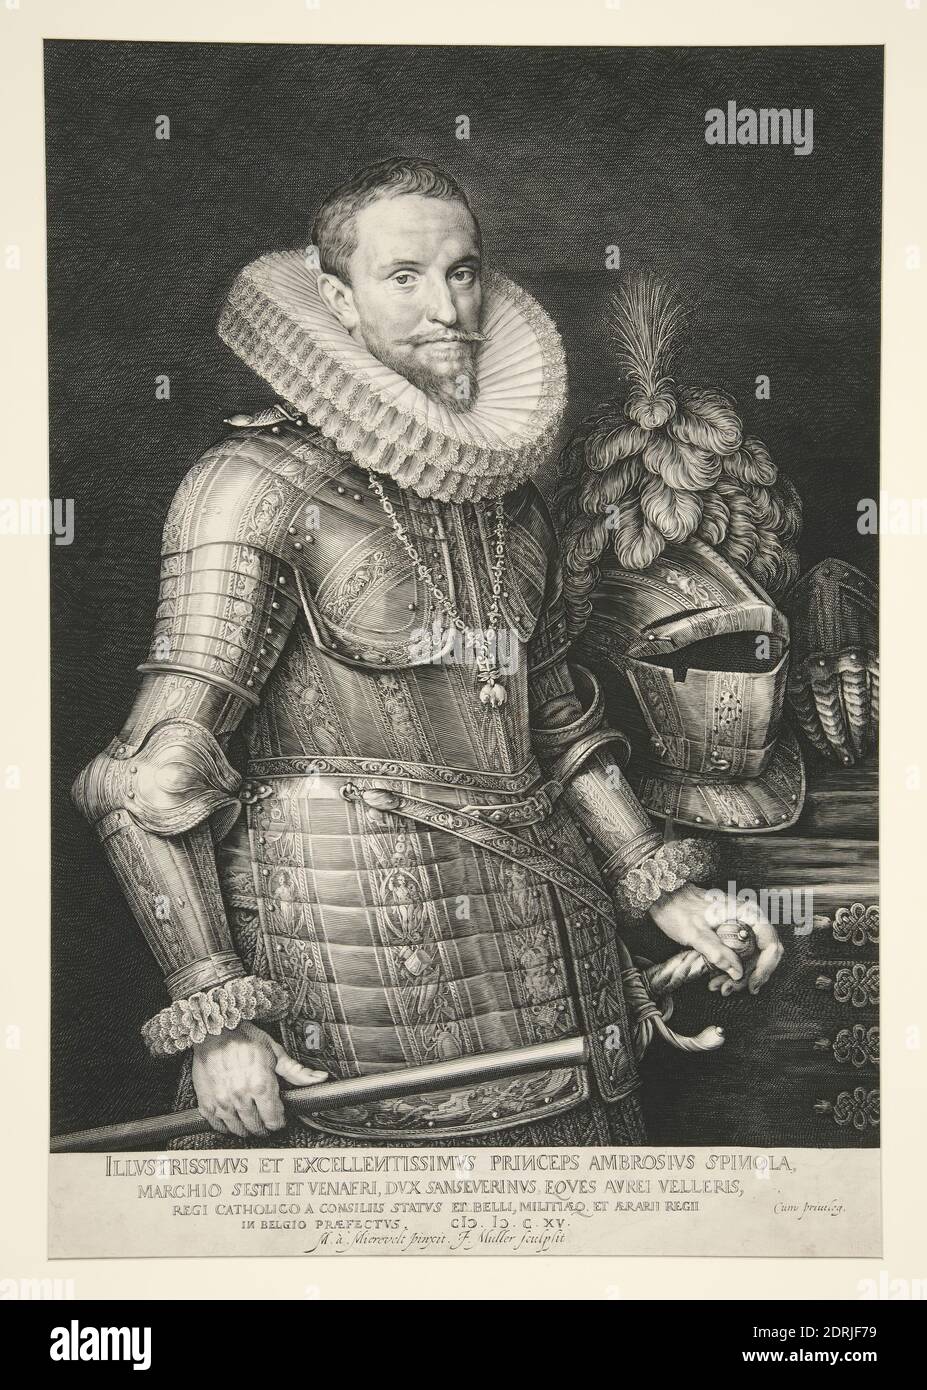 Engraver: Jan Harmensz. Muller, Dutch, 1571–1628, After: Michiel van Miereveld, Dutch, 1567–1641, Portrait of Spinola, Engraving, sheet: 41.6 × 29.4 cm (16 3/8 × 11 9/16 in.), Made in The Netherlands, Dutch, 17th century, Works on Paper - Prints Stock Photo